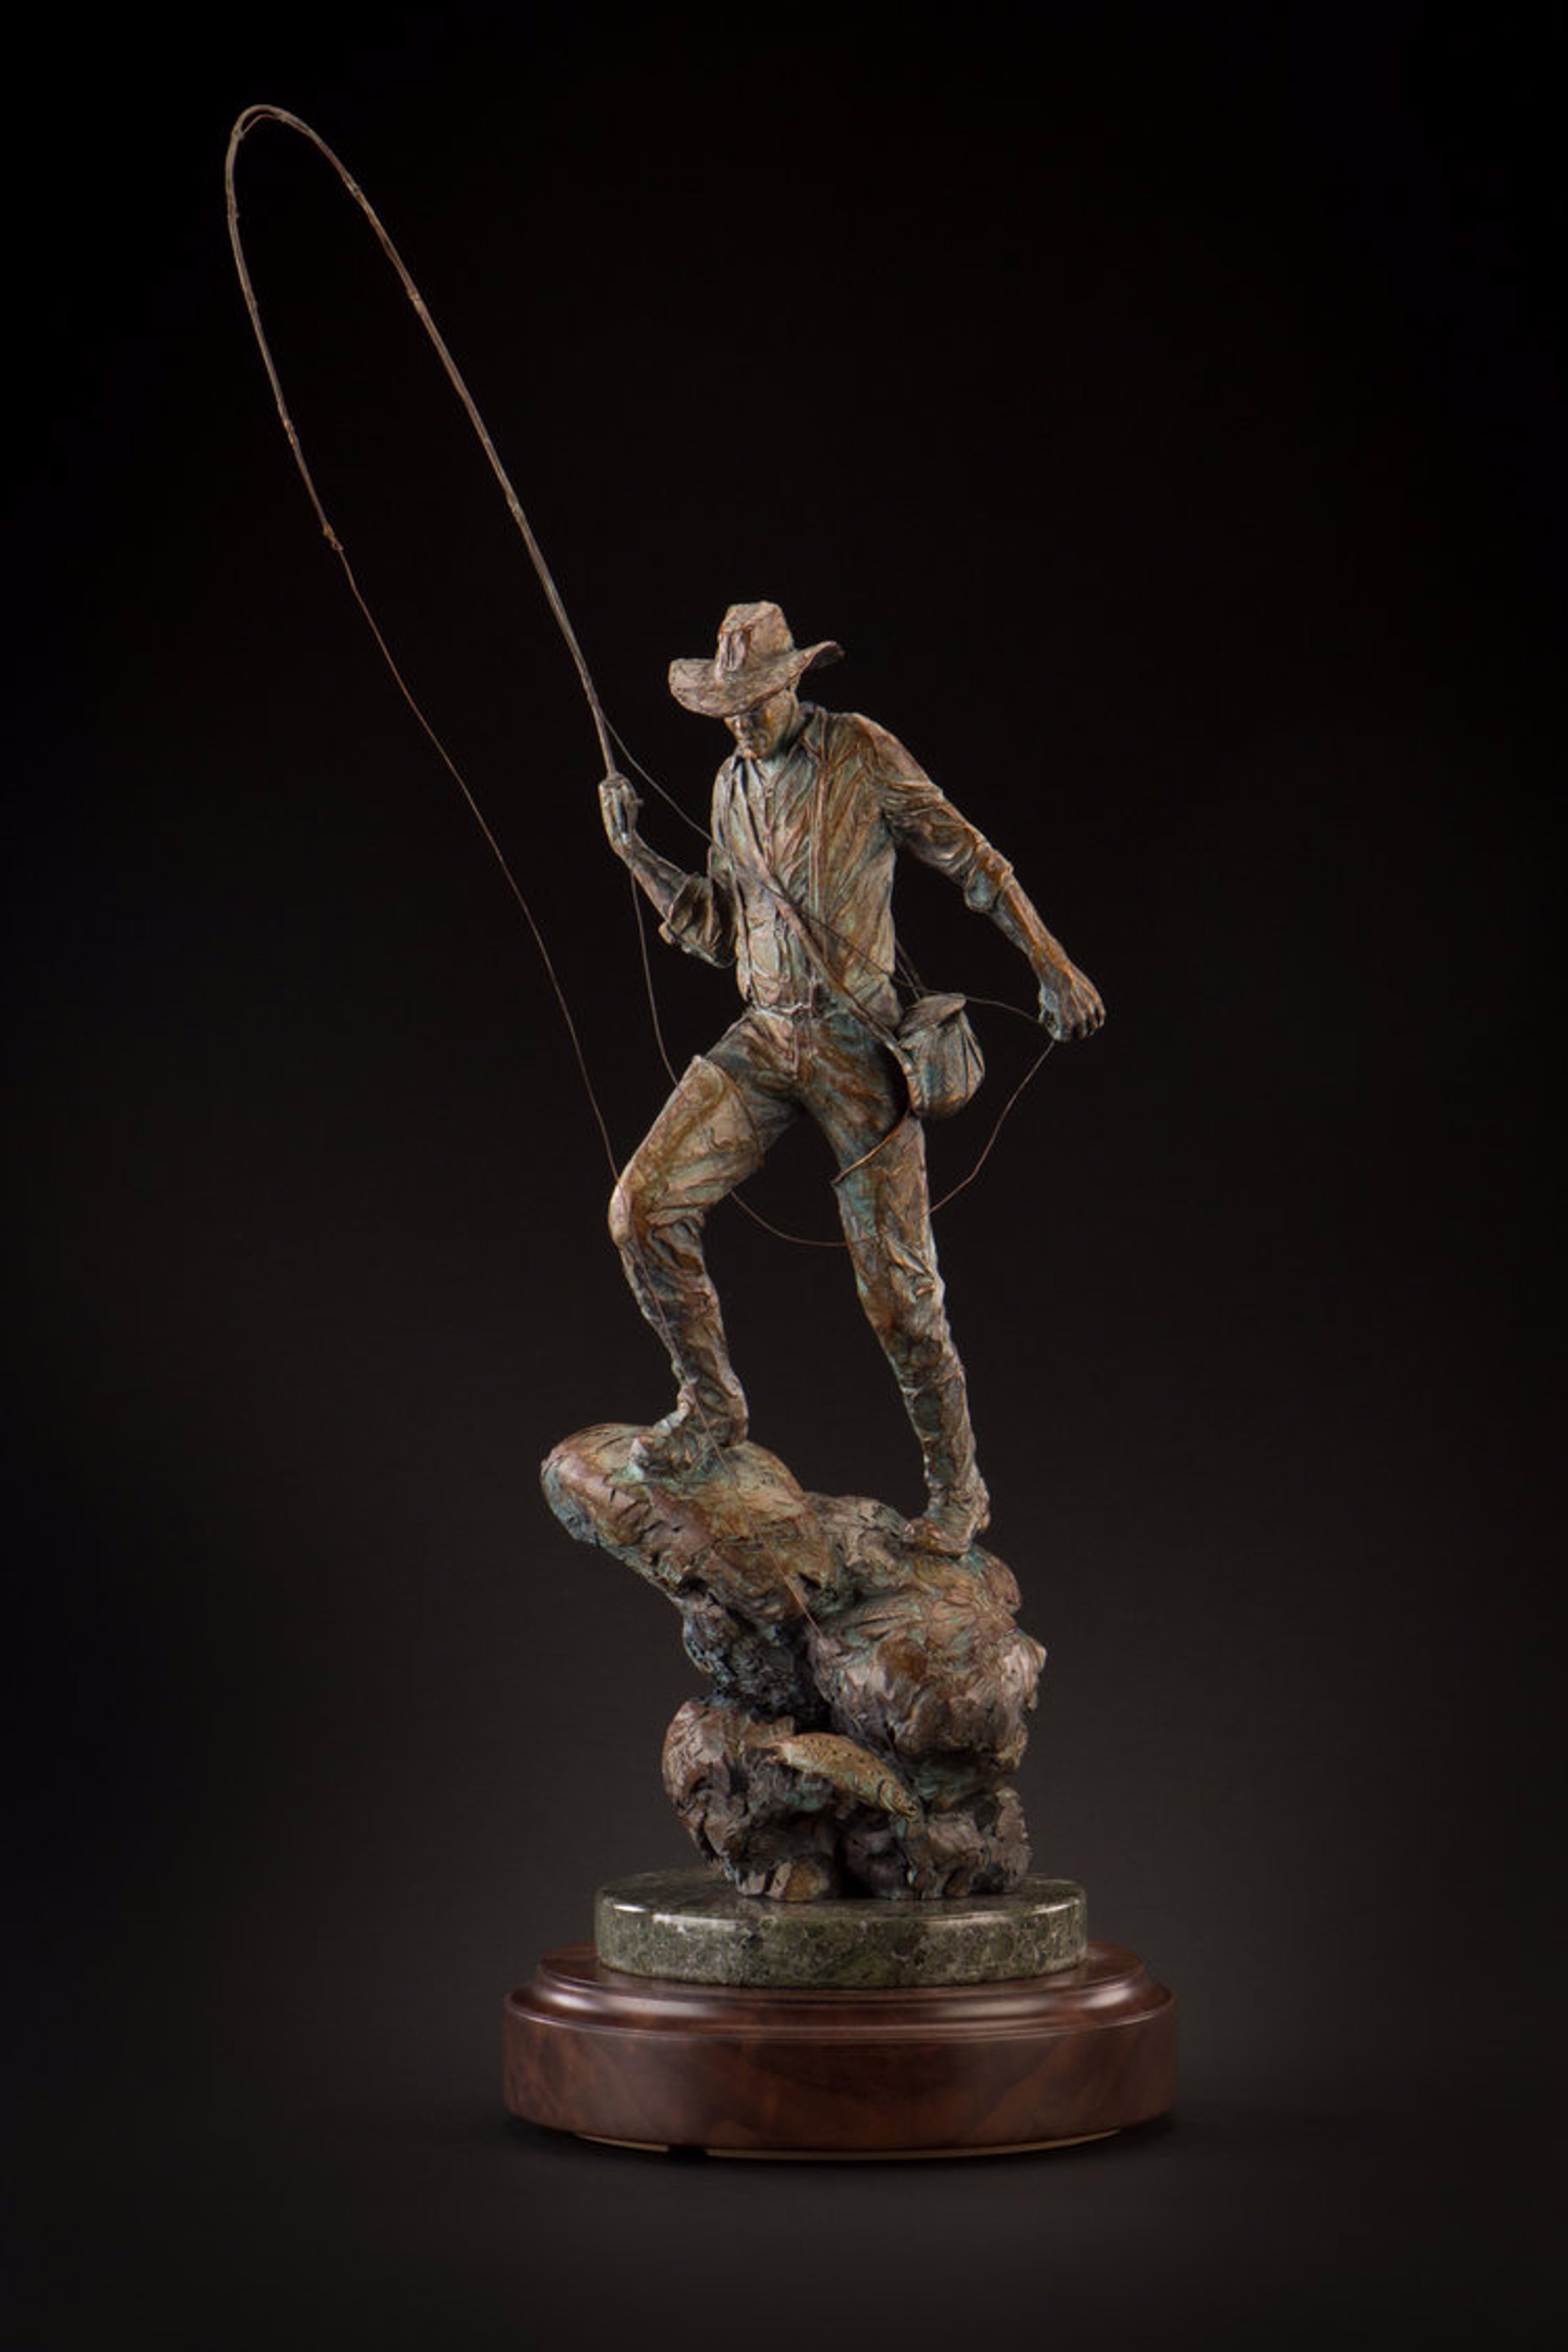 Hooked Maquette (Edition of 35) by Ken Rowe